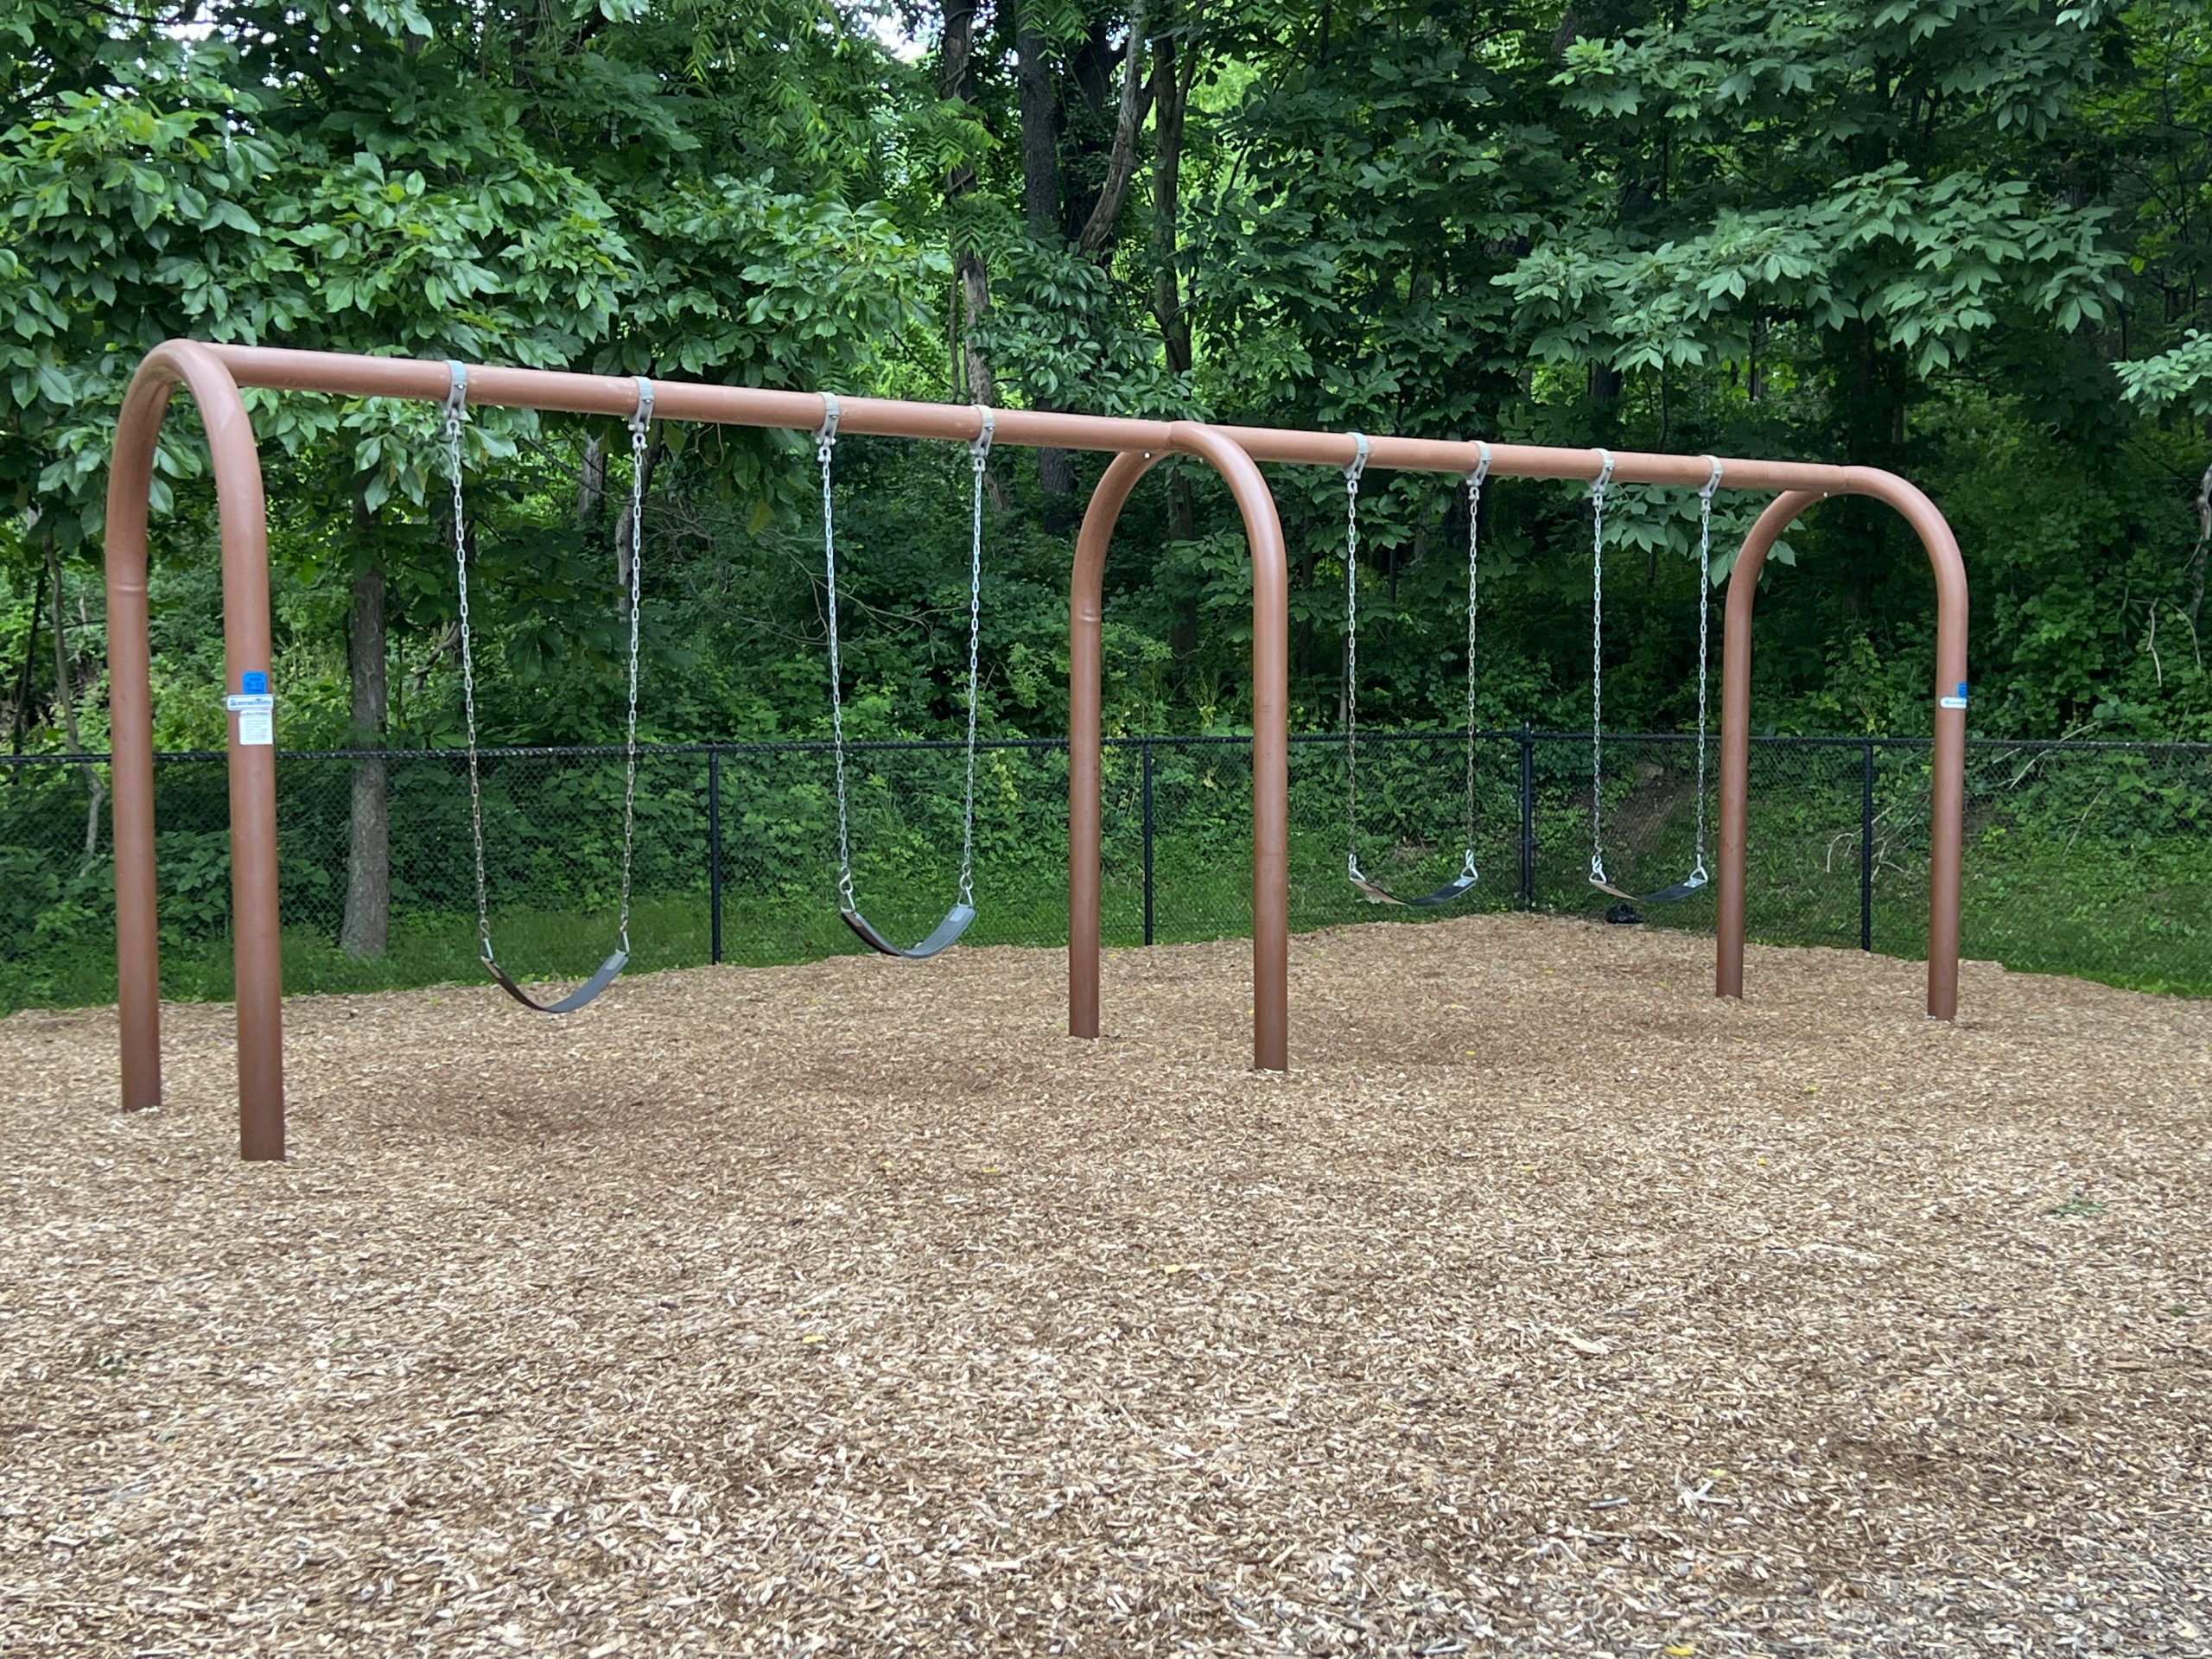 4 traditional swings at Kids Kastle Station Park Playground in Sparta NJ